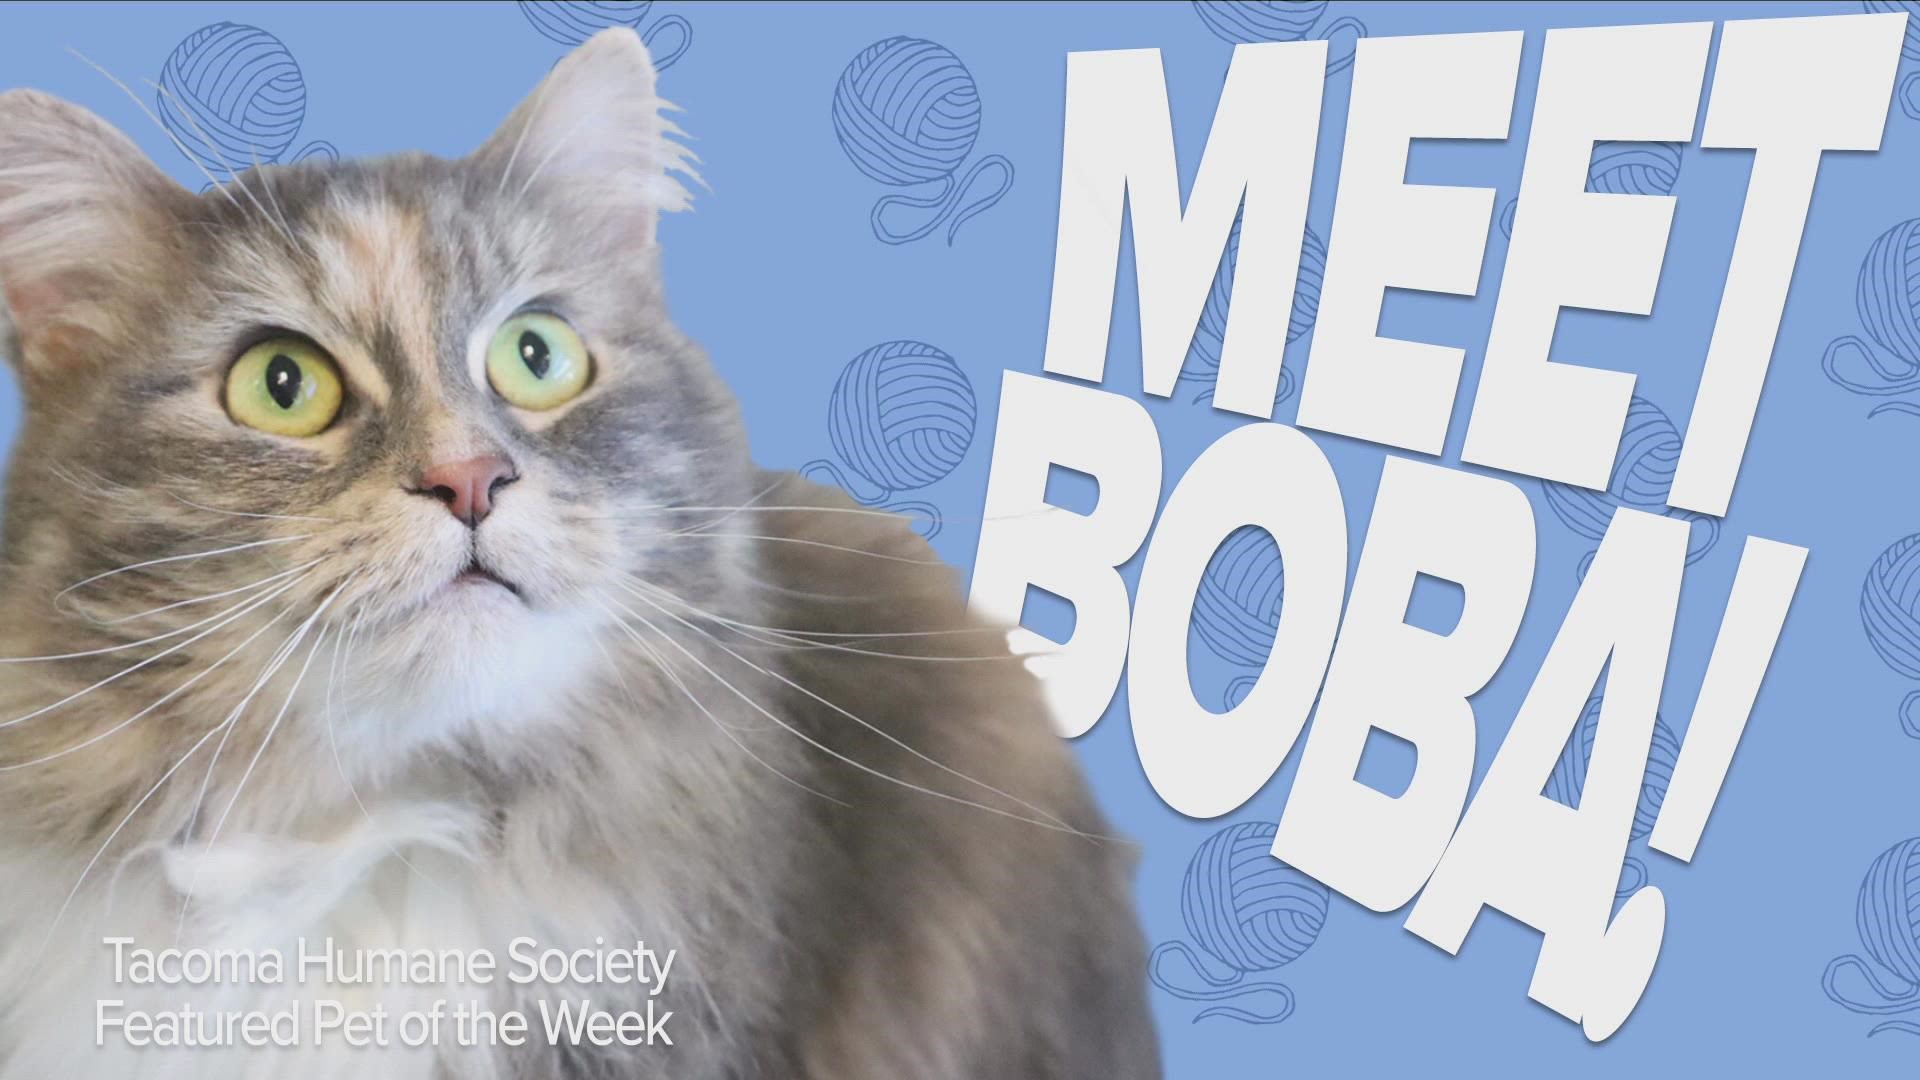 This week's featured adoptable pet is Boba!